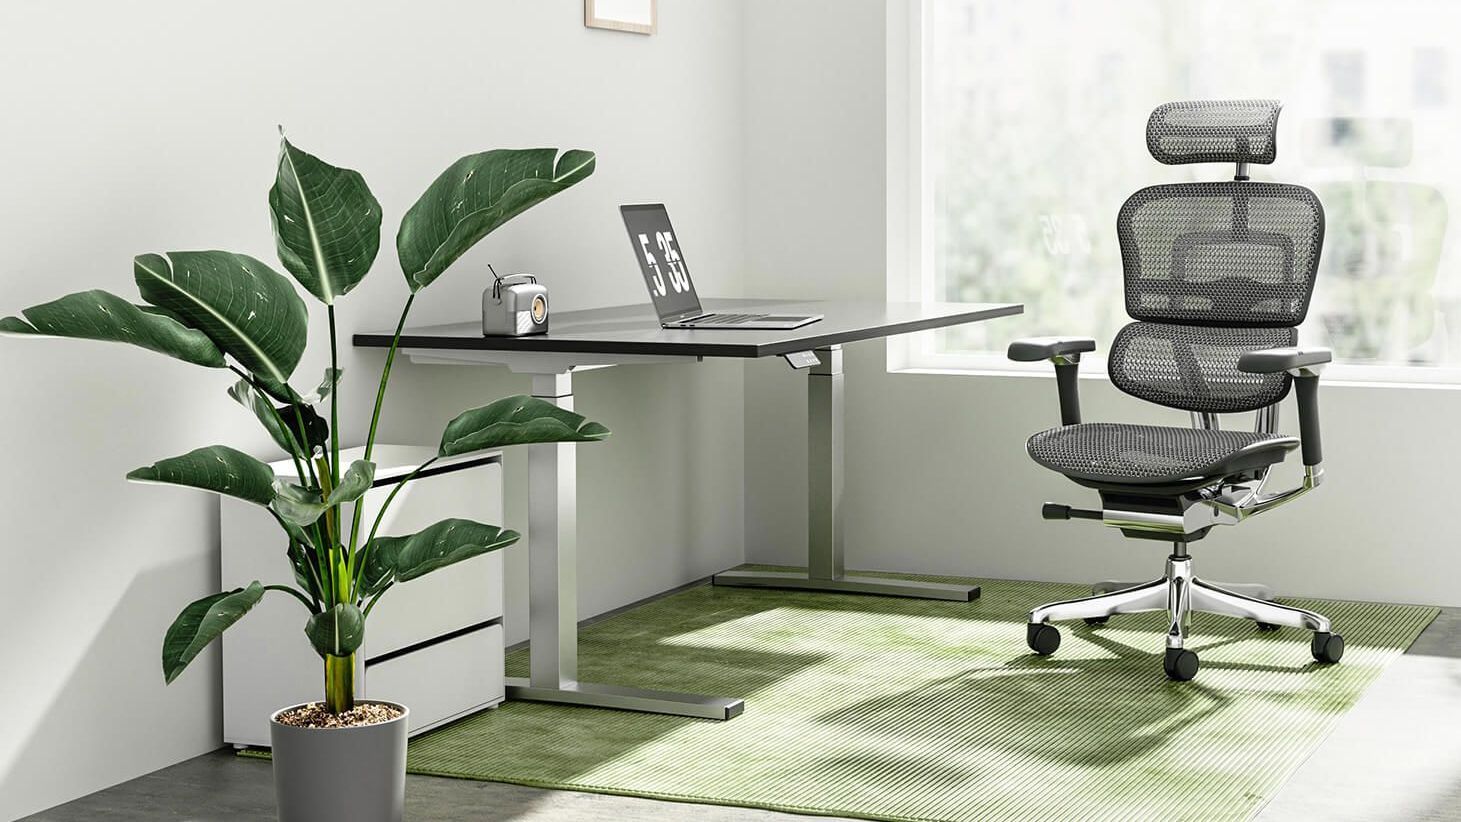 Ergohuman chair at a black and silver desk on a green rug. On the desk is a radio and a laptop. There is a white unit next to the desk, and a green plant. There is a large window behind the chair, letting in natural light. 